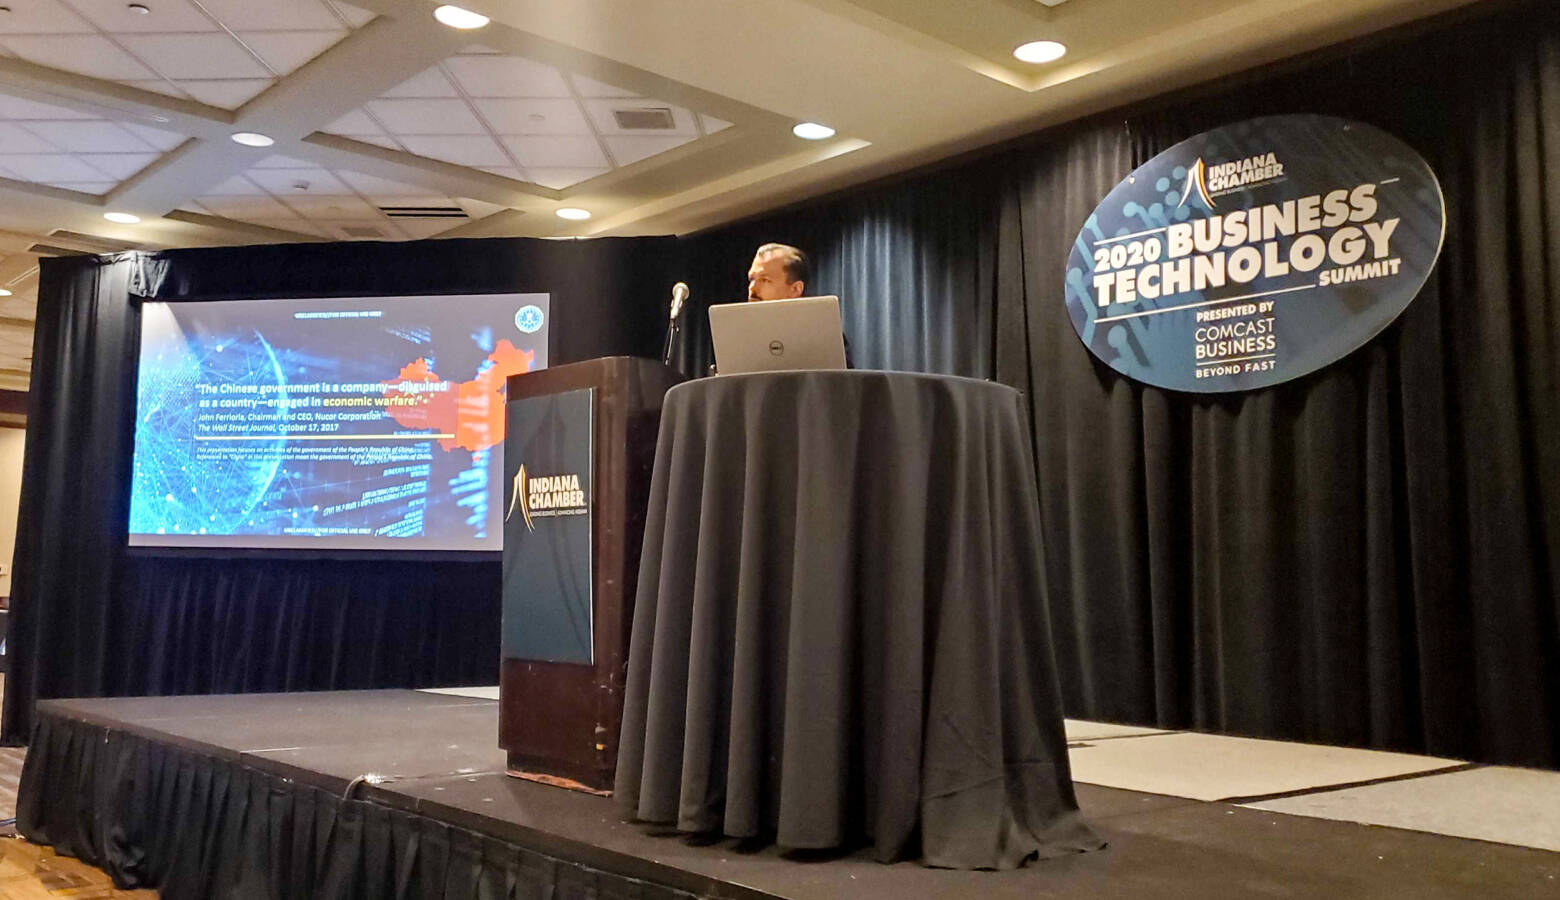 FBI Assistant Special Agent in Charge Robert Middleton speaks at the Indiana Chamber of Commerce’s two-day Business Technology Summit. (Samantha Horton/IPB News)